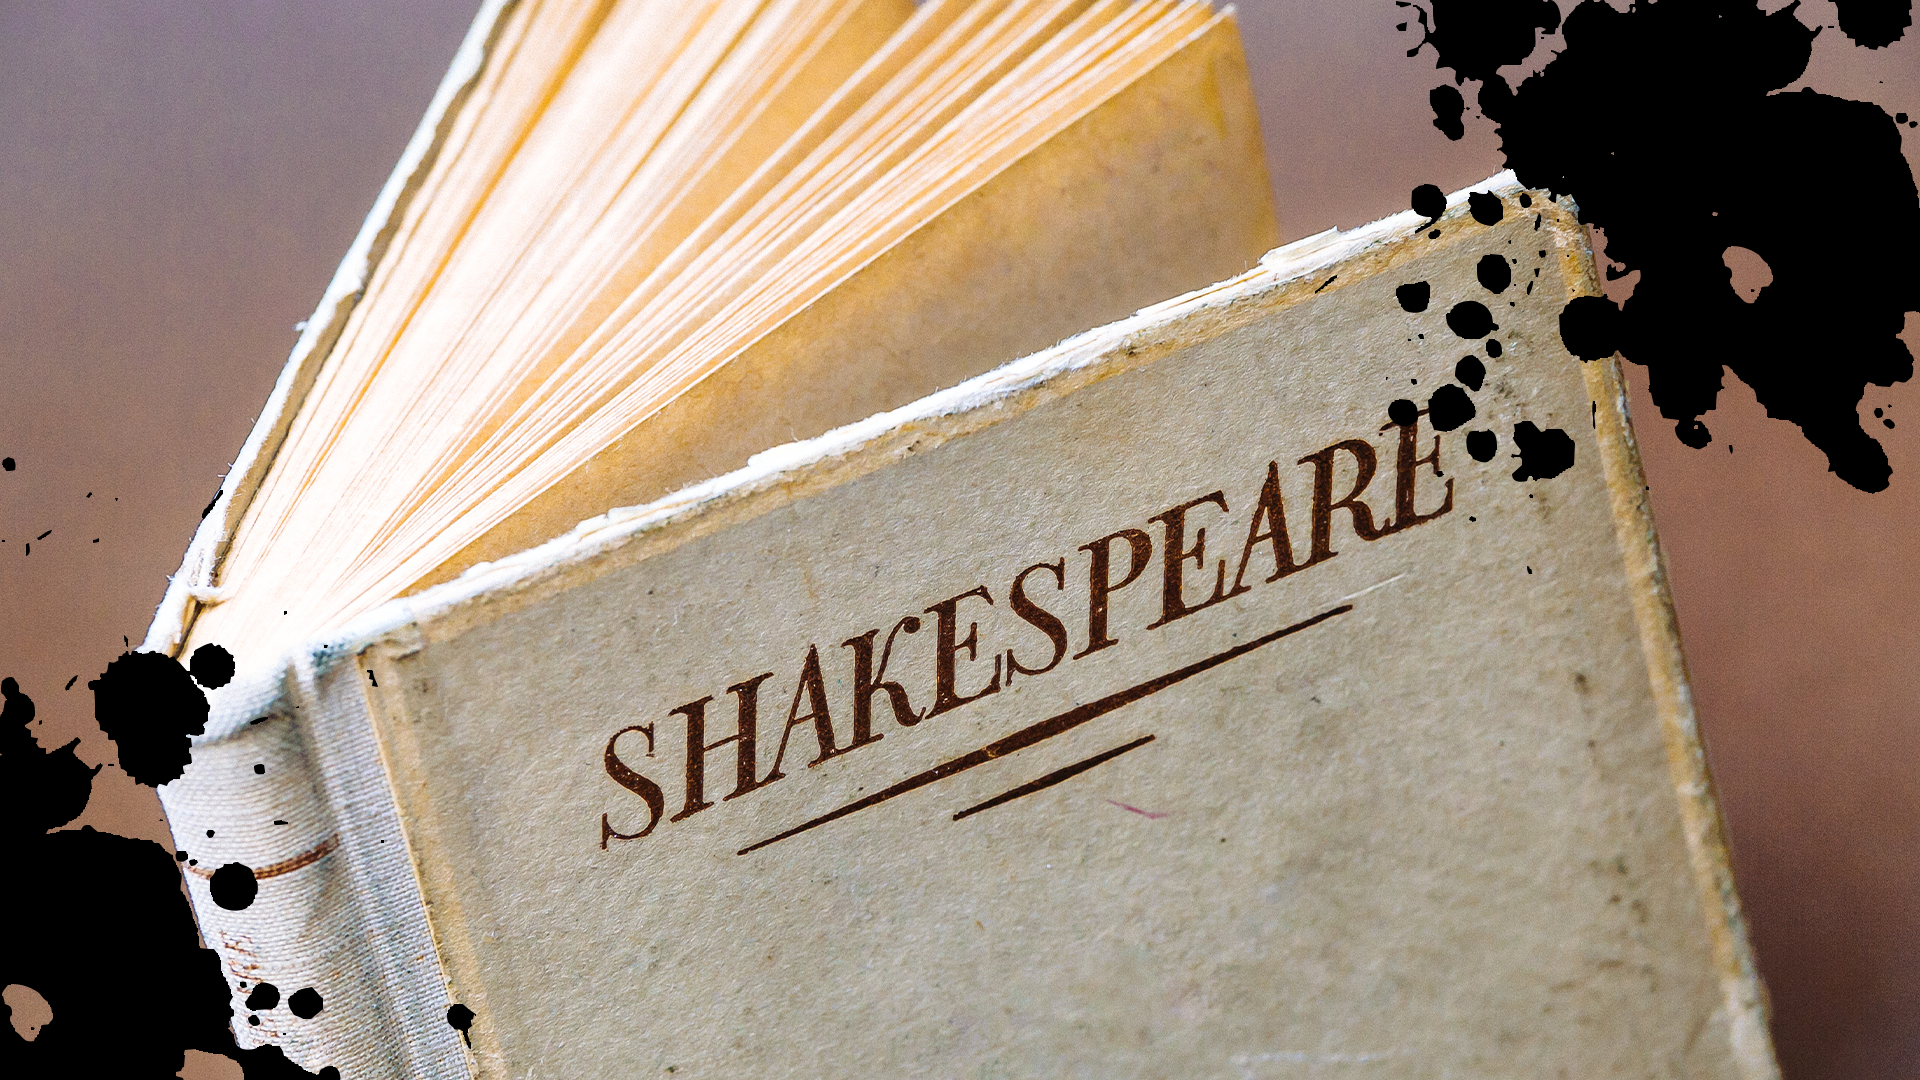 A book of Shakespeare and some ink splats